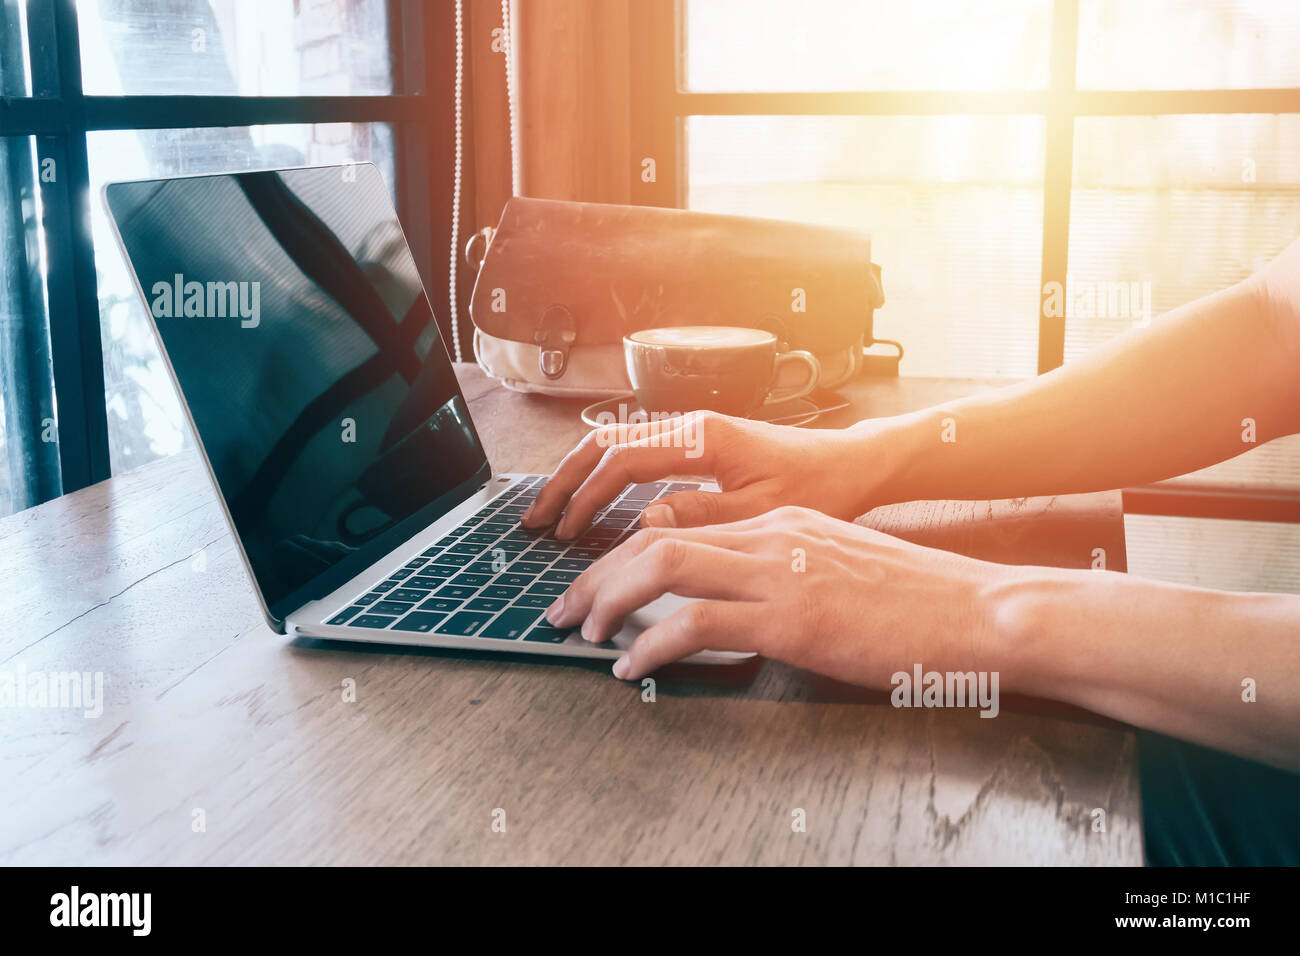 Man hands typing on laptop on table in coffee shop with len flare and warm filter with free wifi ,concept for freelance can working any time anywhere. Stock Photo